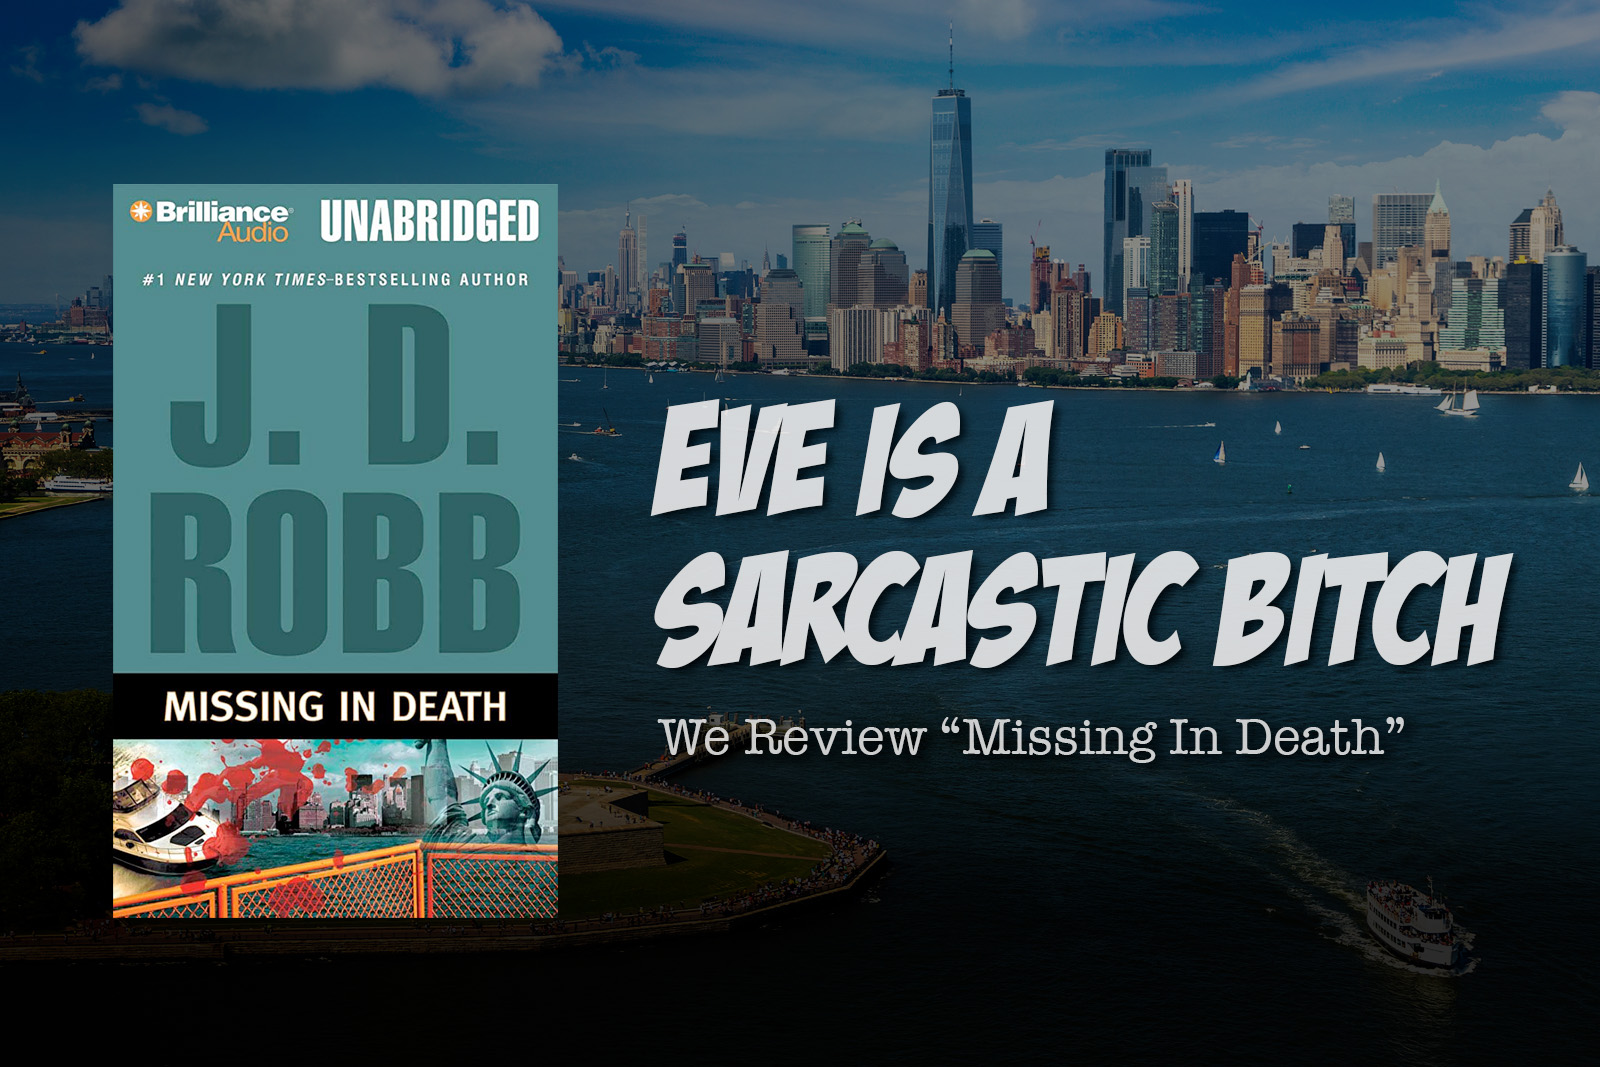 Eve is a Sarcastic Bitch – We Review “Missing in Death” by J.D. Robb